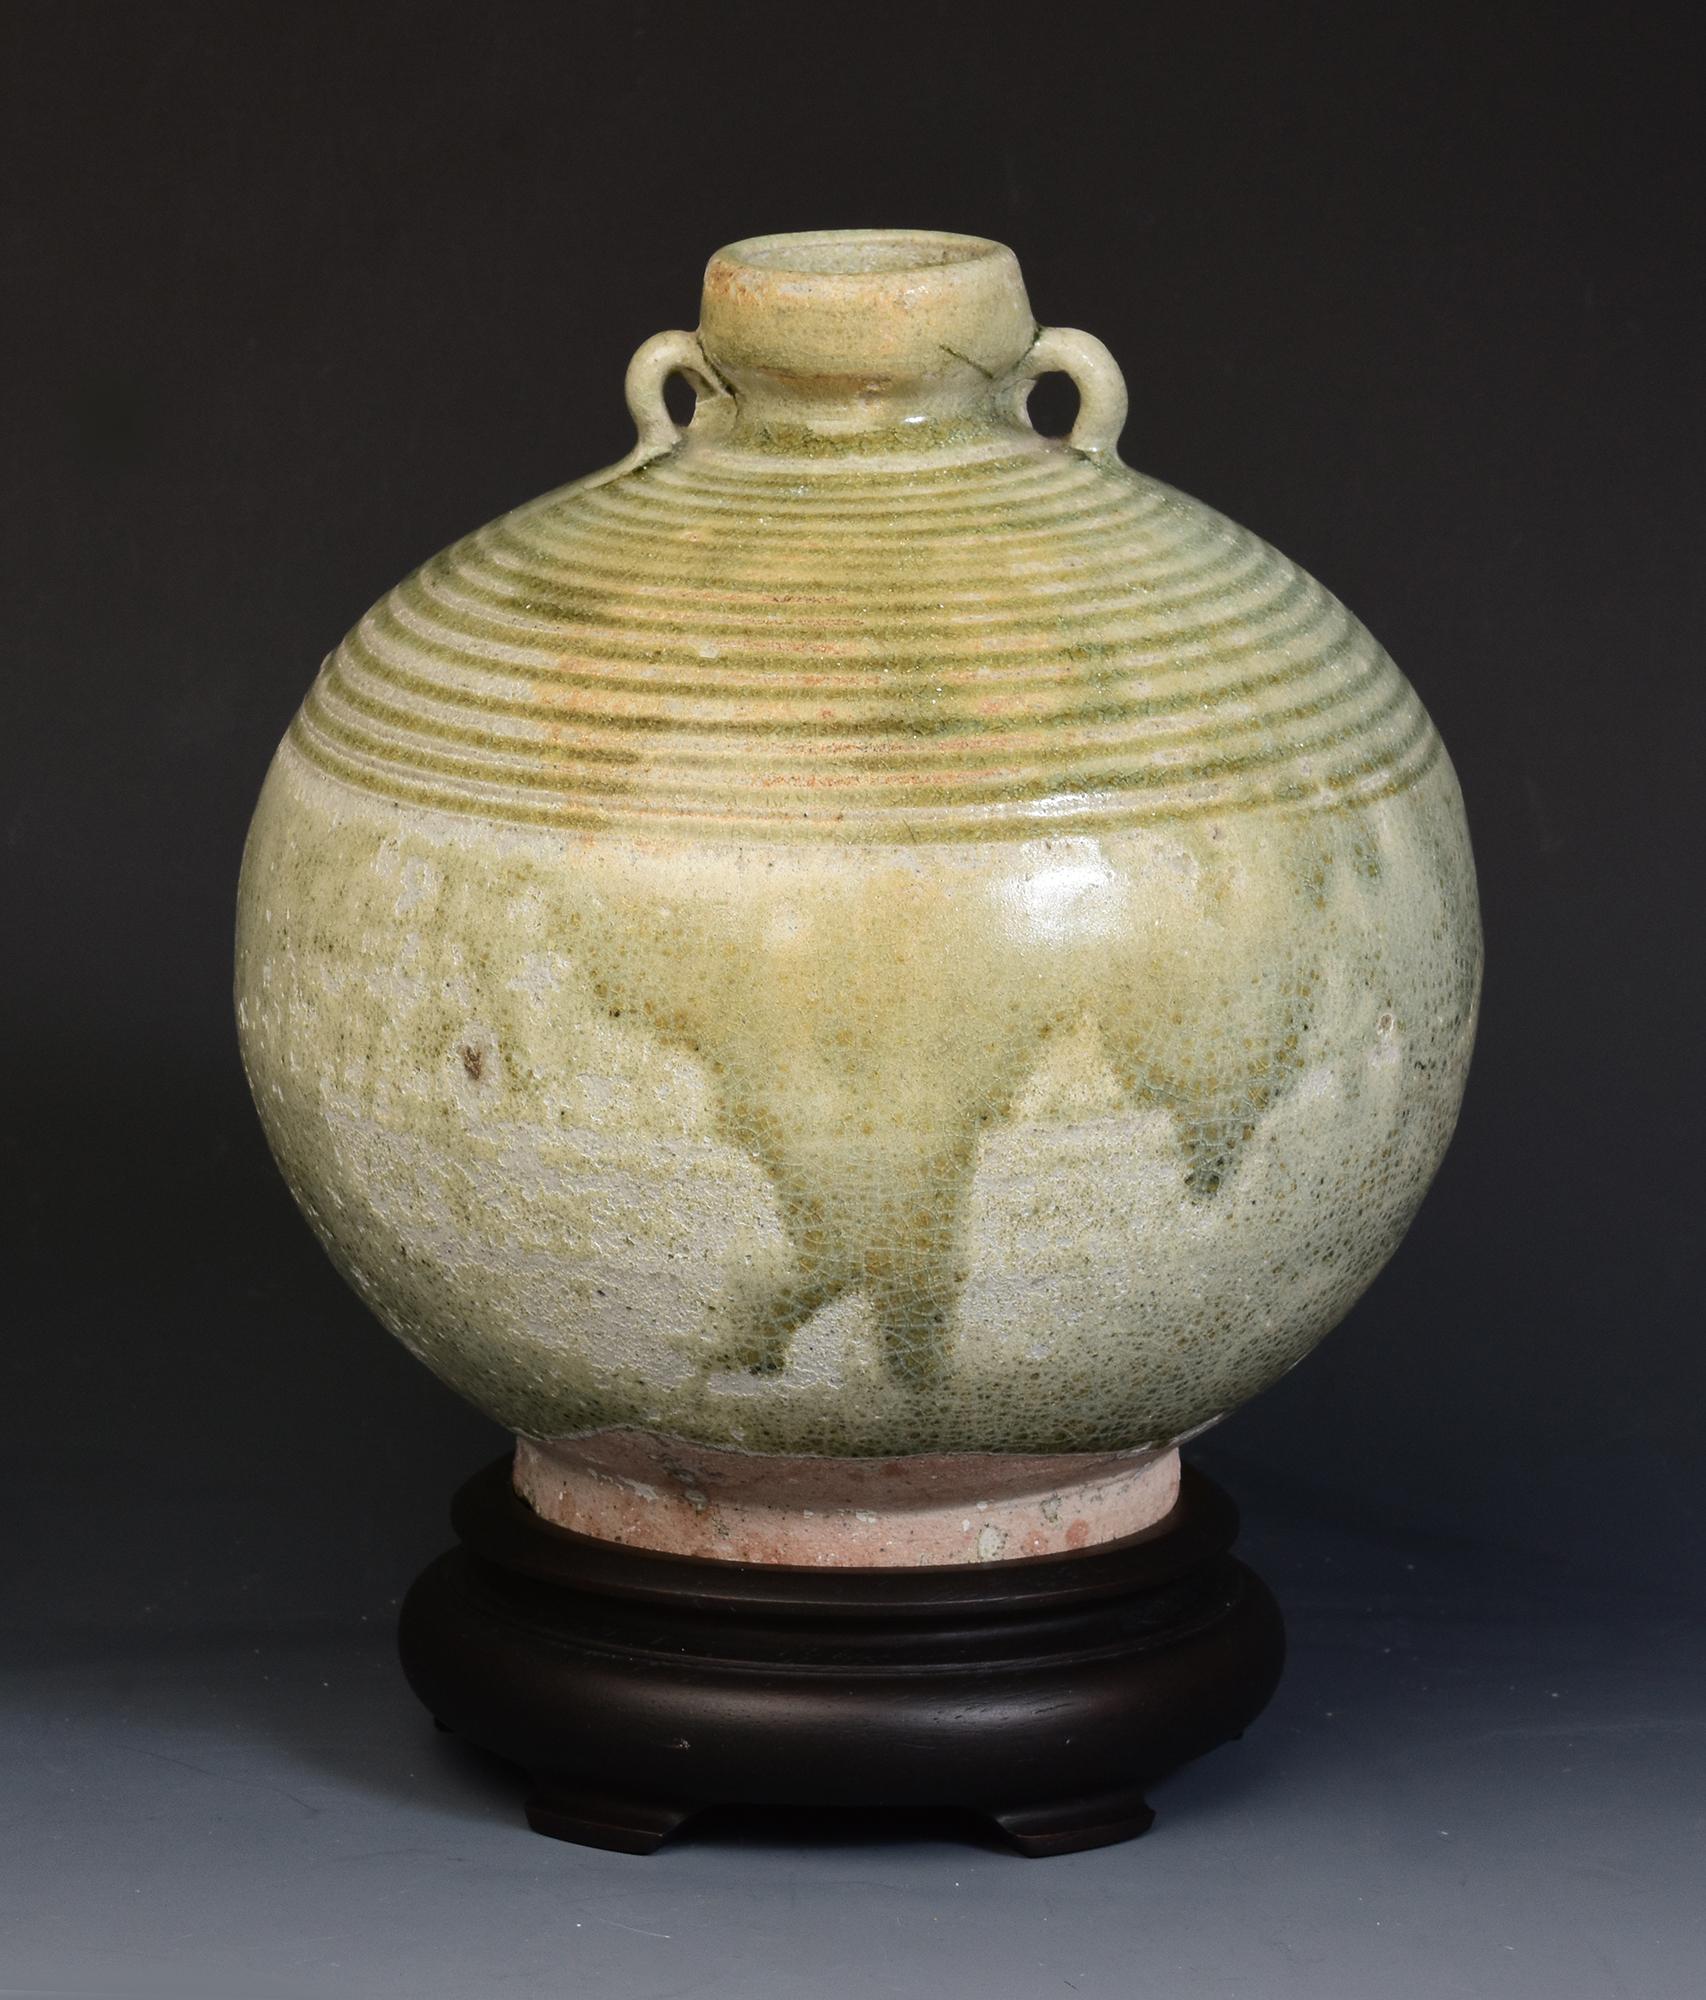 Antique Thai Sukhothai celadon glazed pottery bottle.

Age: Thailand, Sukhothai Period, 14th - 16th Century
Size: Height 17.3 C.M. / Width 16.8 C.M. (size excluding stand)
Condition: Nice condition overall (some expected degradation due to its